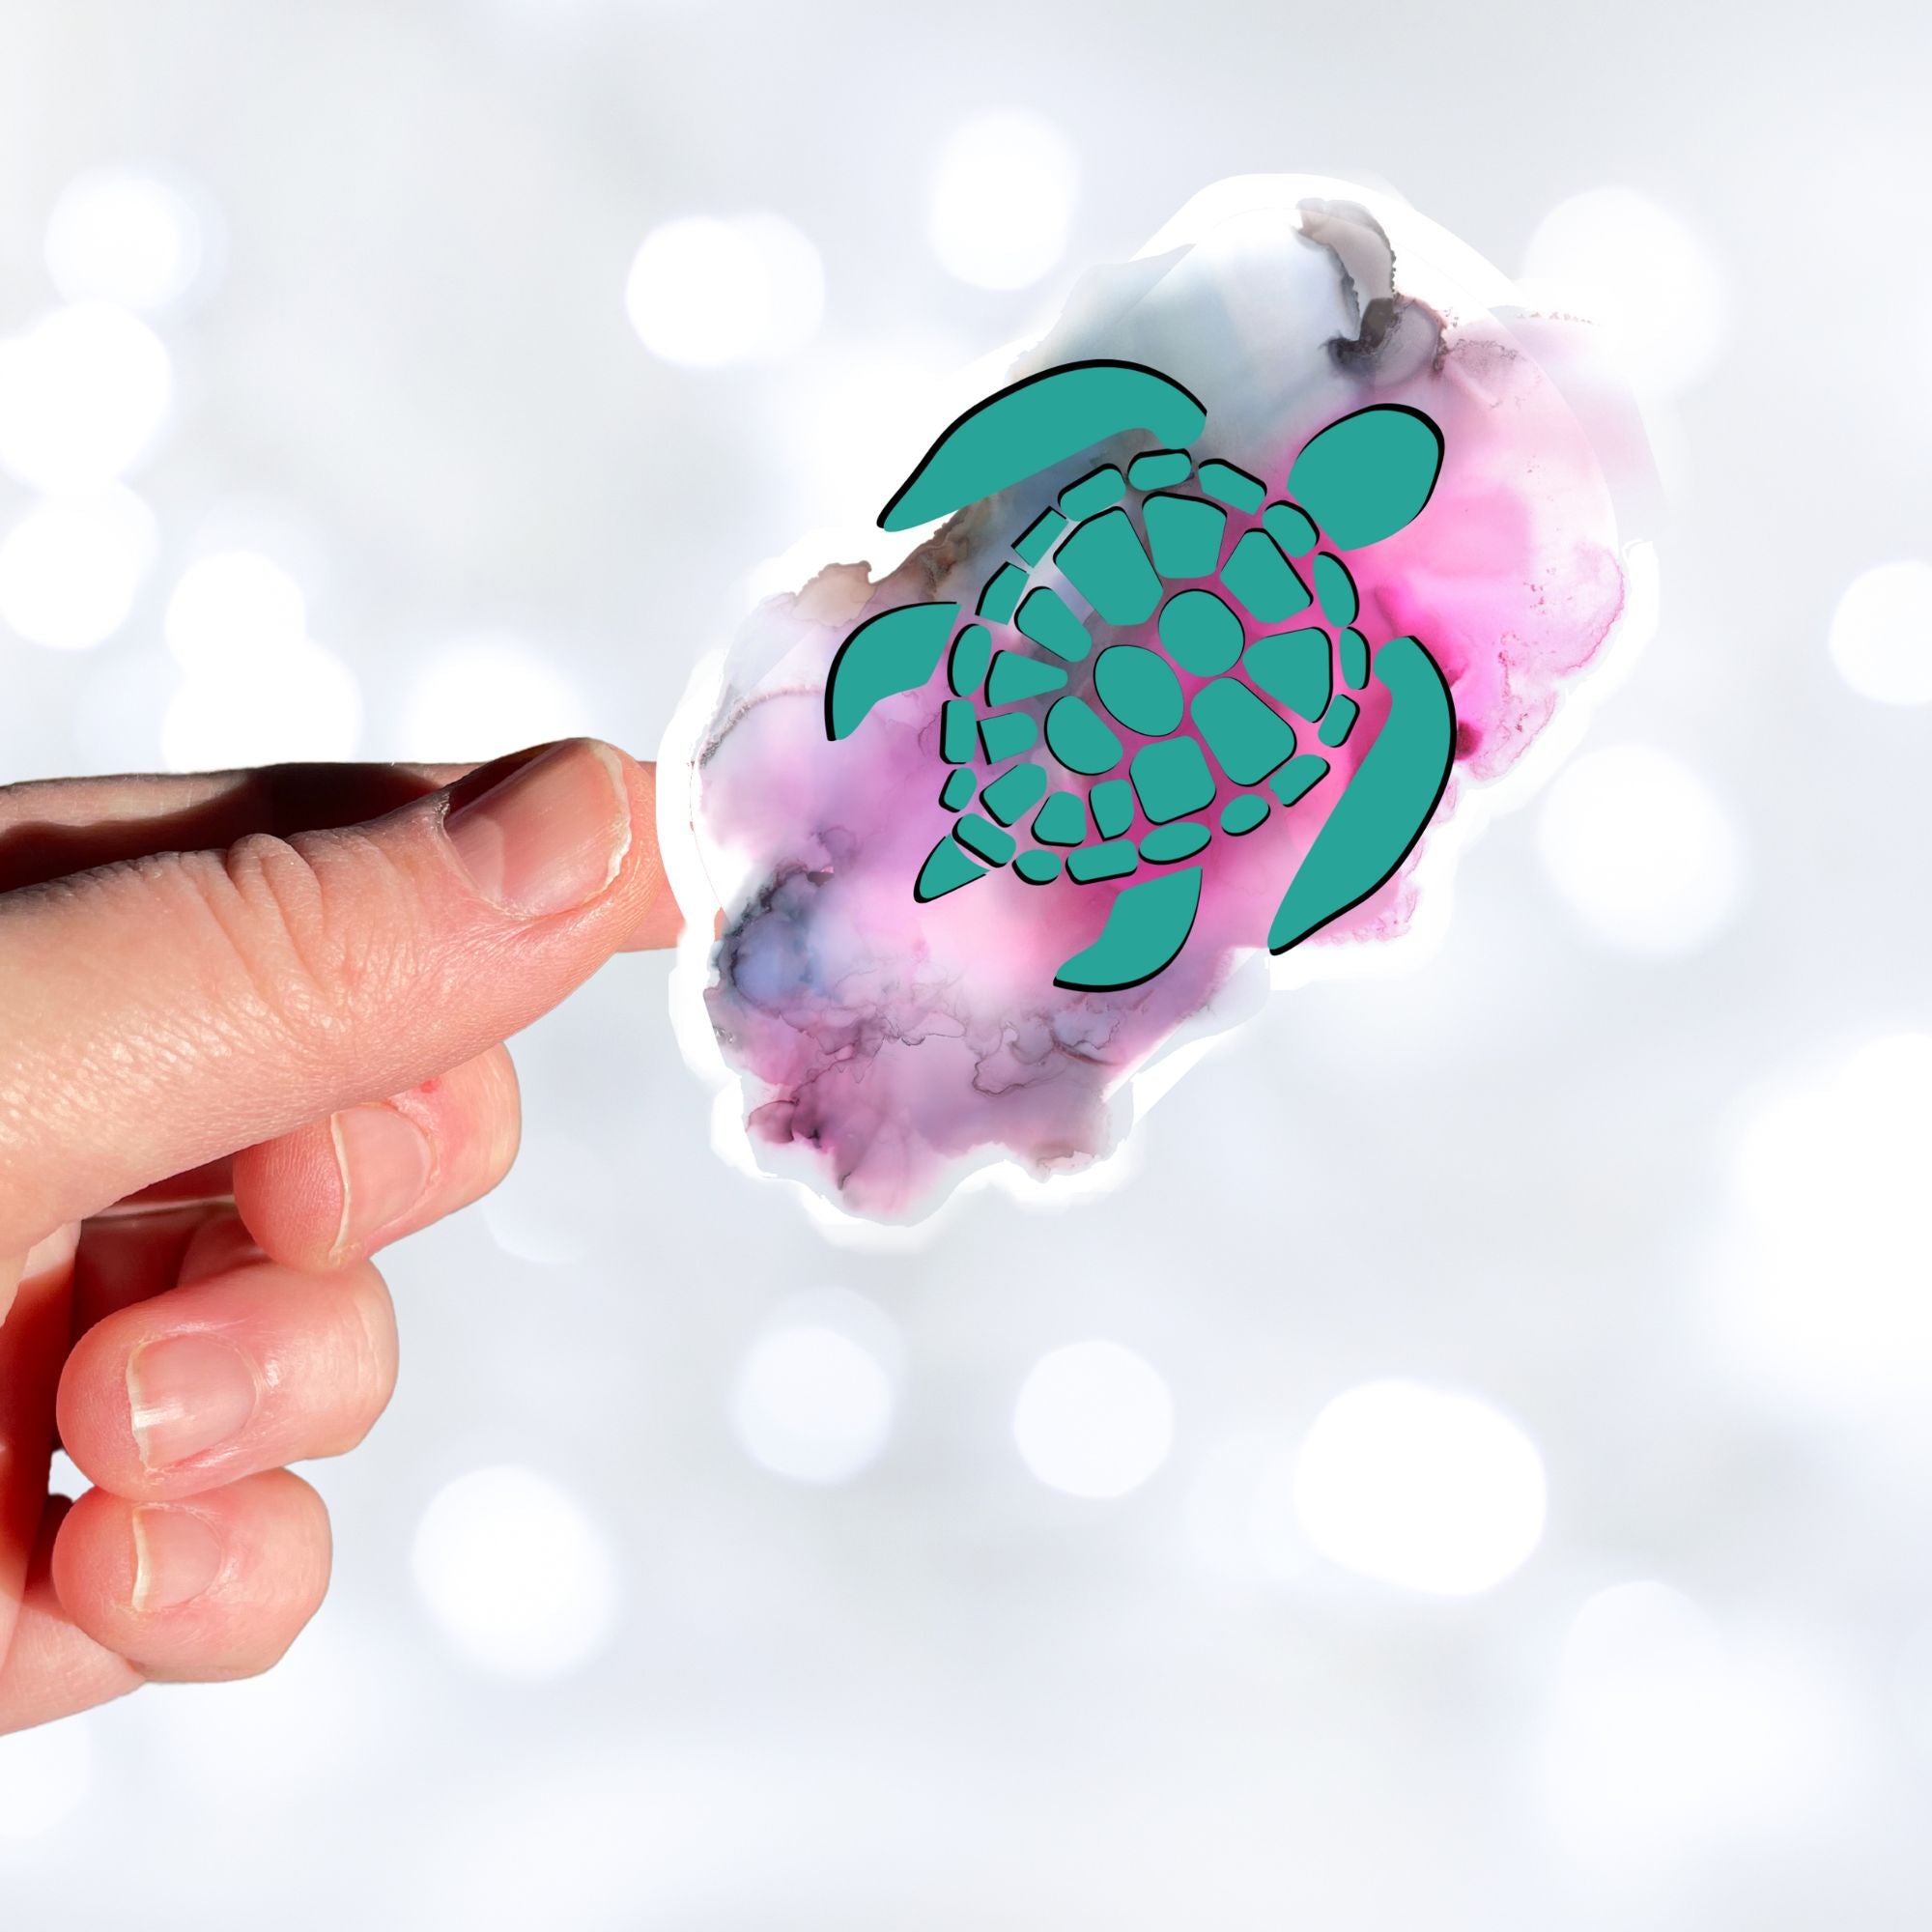 This individual die-cut sticker features a green tribal style turtle on a gray and pink cloudy background. This image shows a hand holding the turtle sticker.